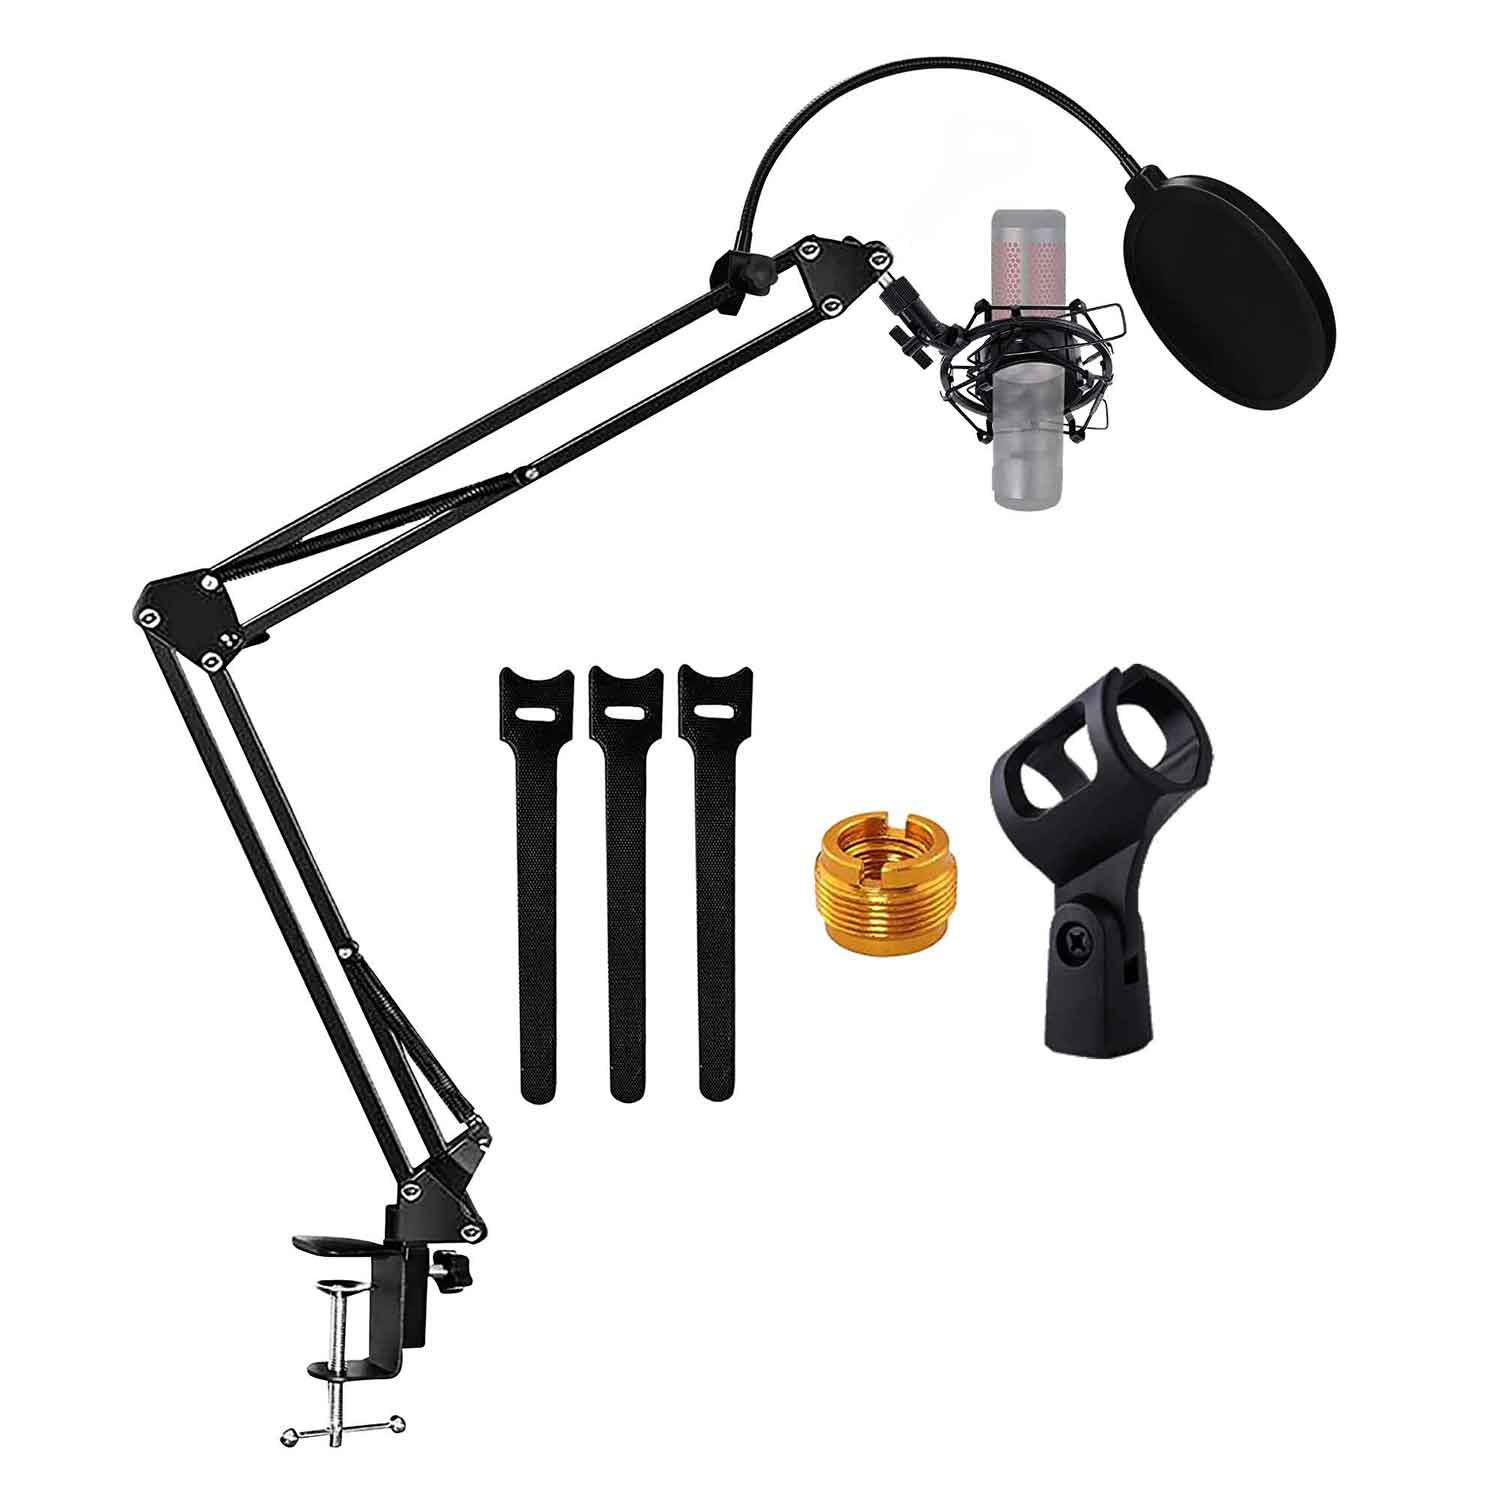 5 Core Podcast Equipment Bundle w Adjustable Suspension Boom Scissor Arm 3/8"to 5/8" Screw Adapter Shock Mount Dual Layer Pop Filter Cable Ties for Recording, Gaming, Singing, YouTube - ARM SET 16